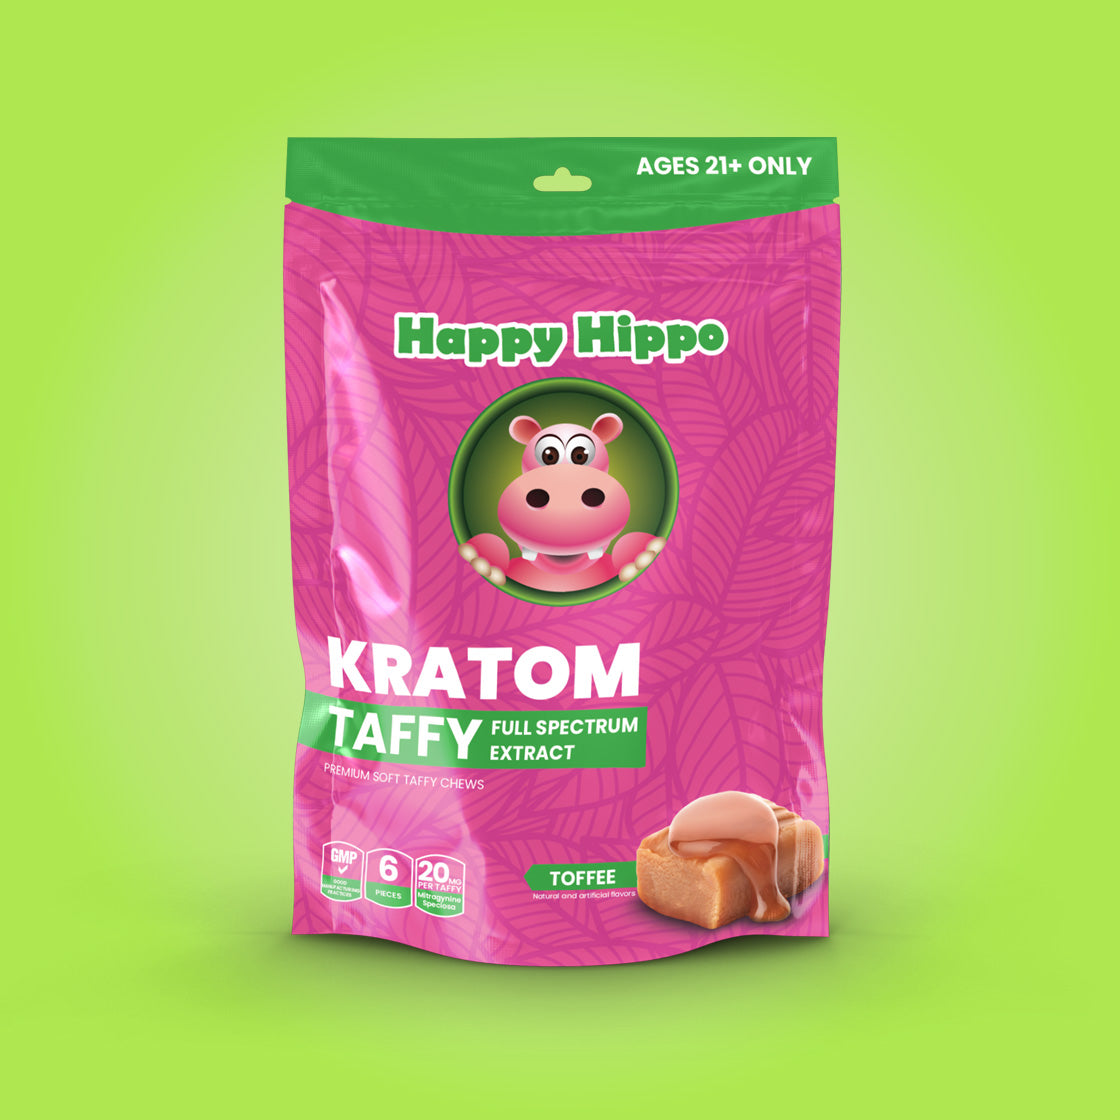 Product Image depicting a bag of Happy Hippo brand Full Spectrum Kratom Extract Taffy Chews (Toffee Flavor). 6 Taffy Chews per bag.